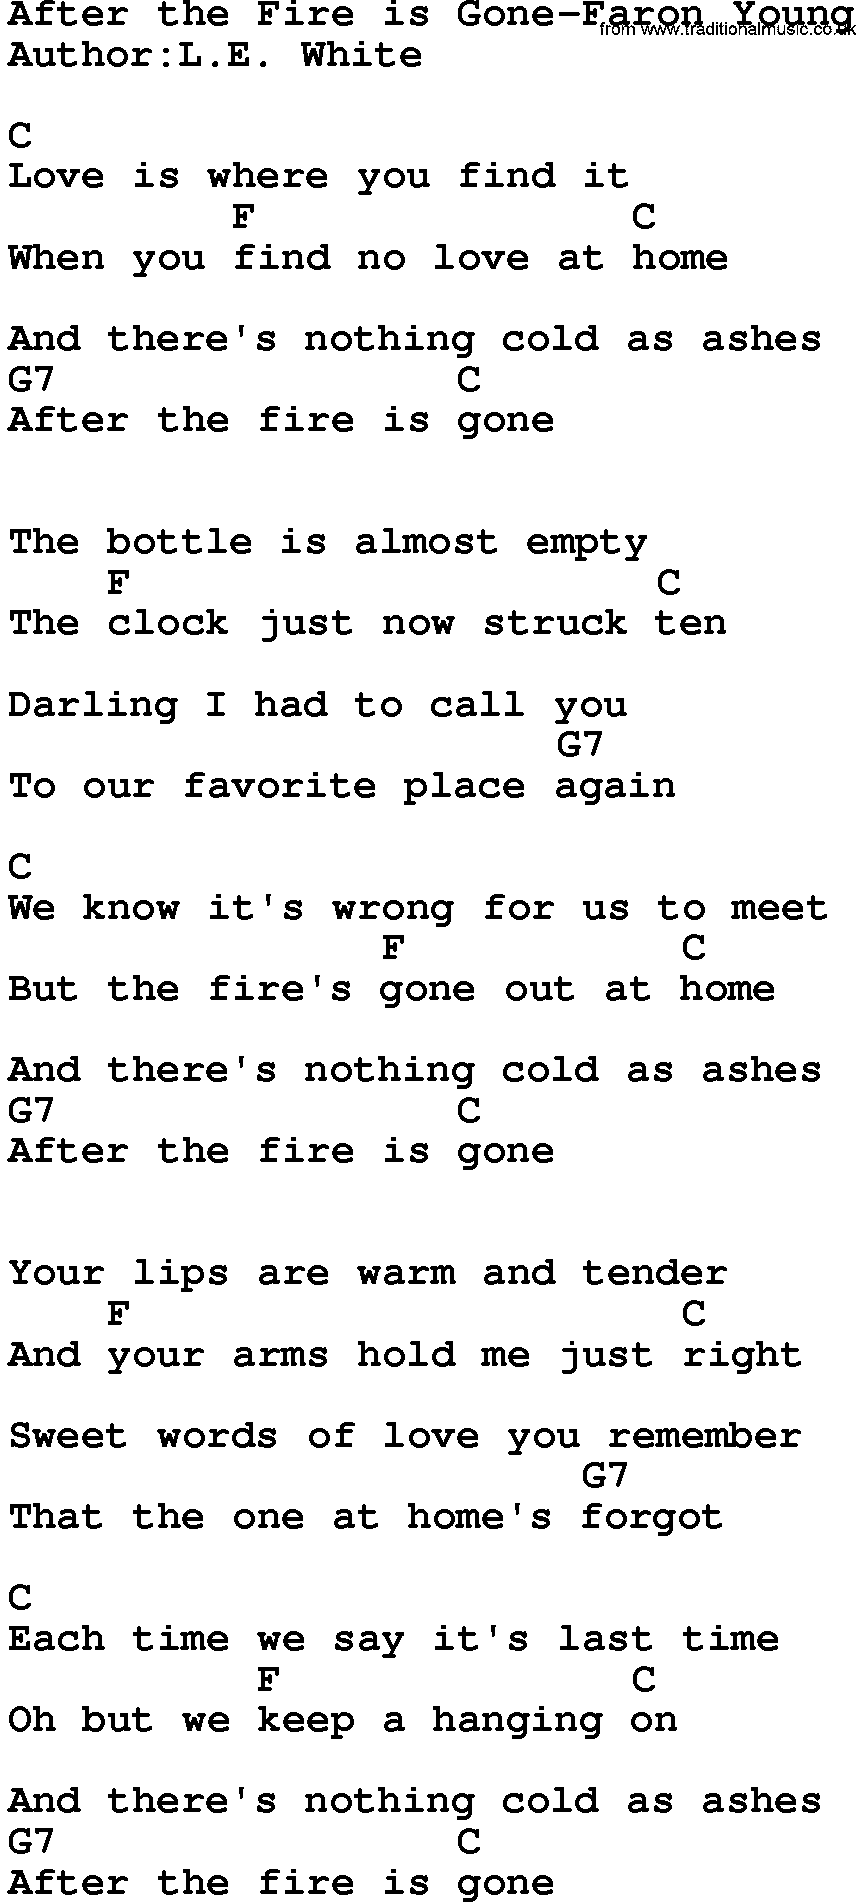 Country music song: After The Fire Is Gone-Faron Young lyrics and chords